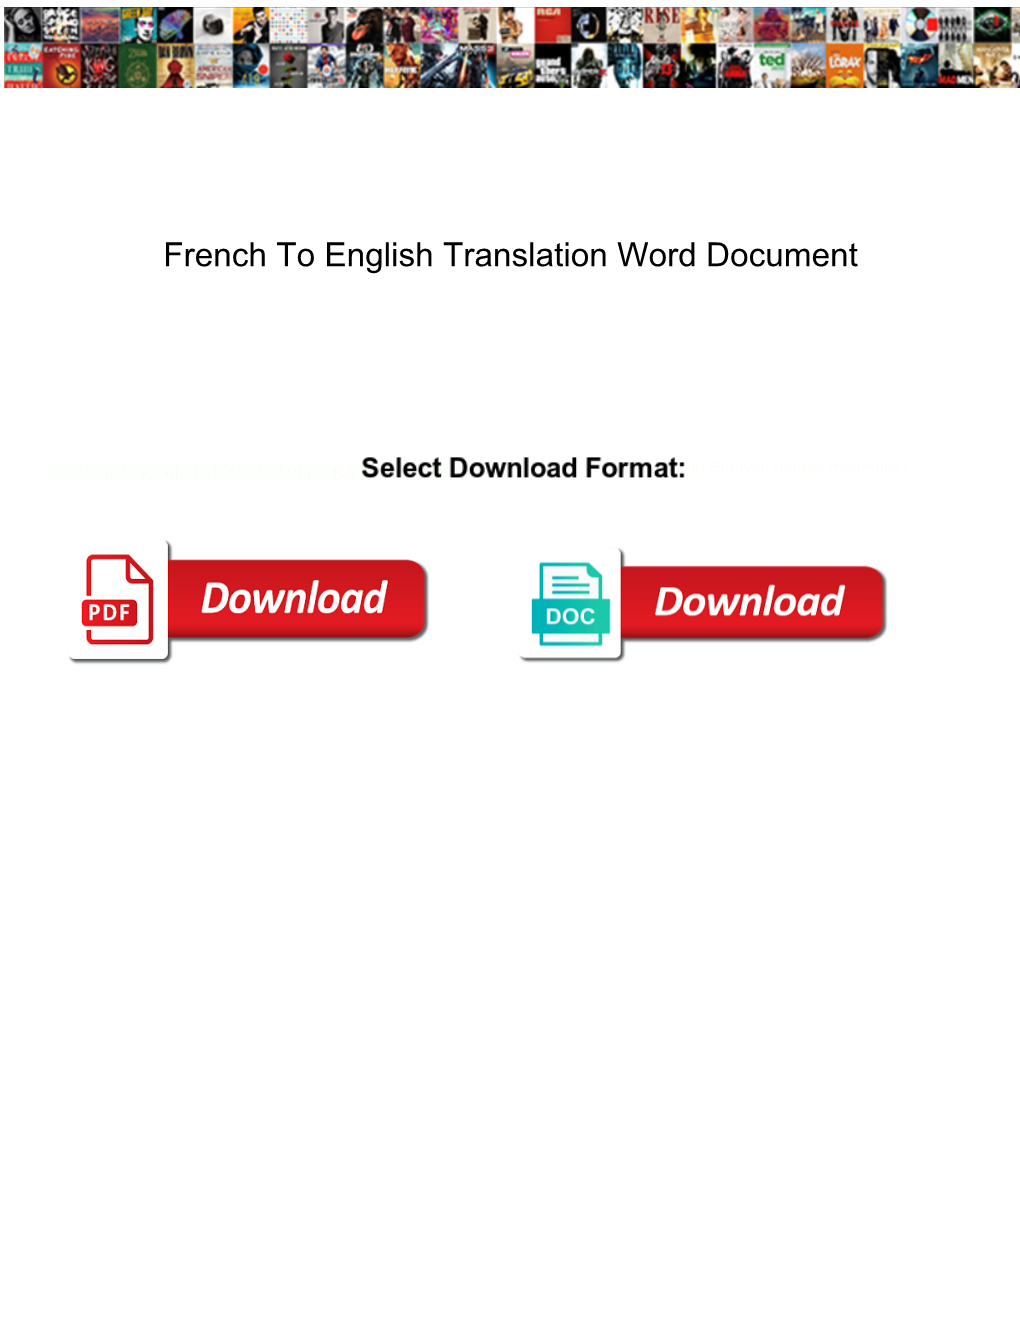 French to English Translation Word Document